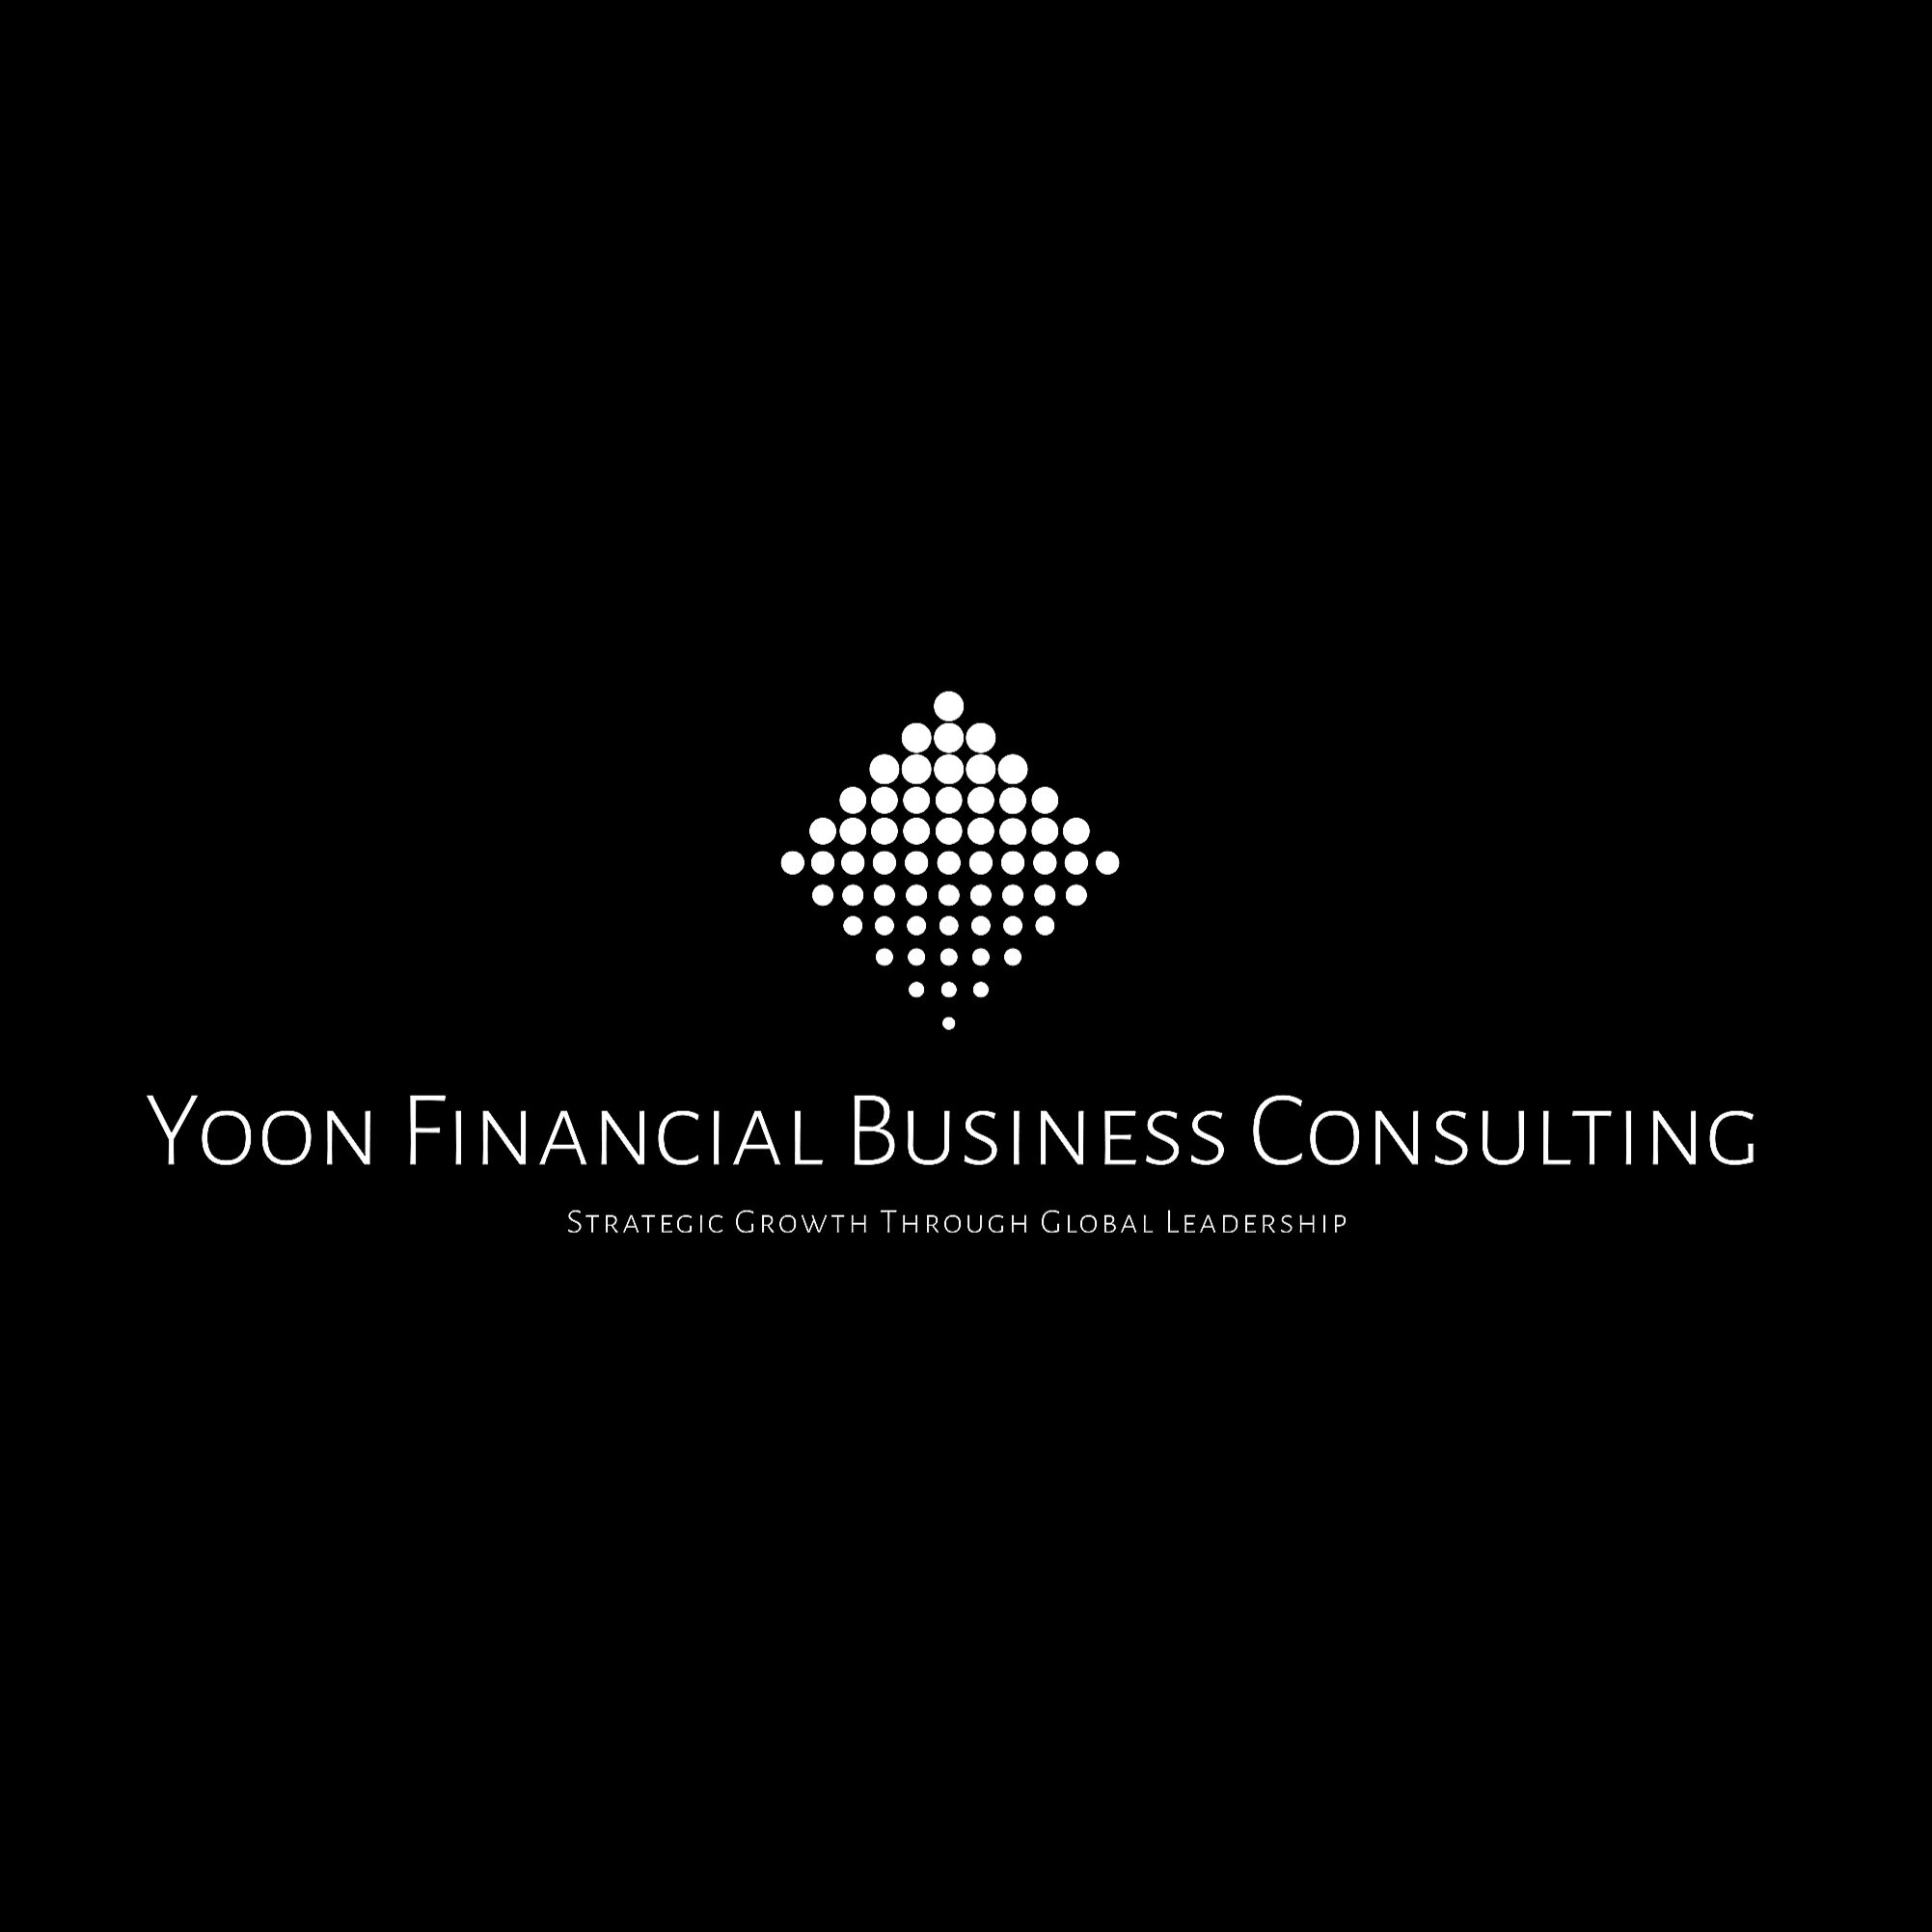 YOON FINANCIAL BUSINESS CONSULTING